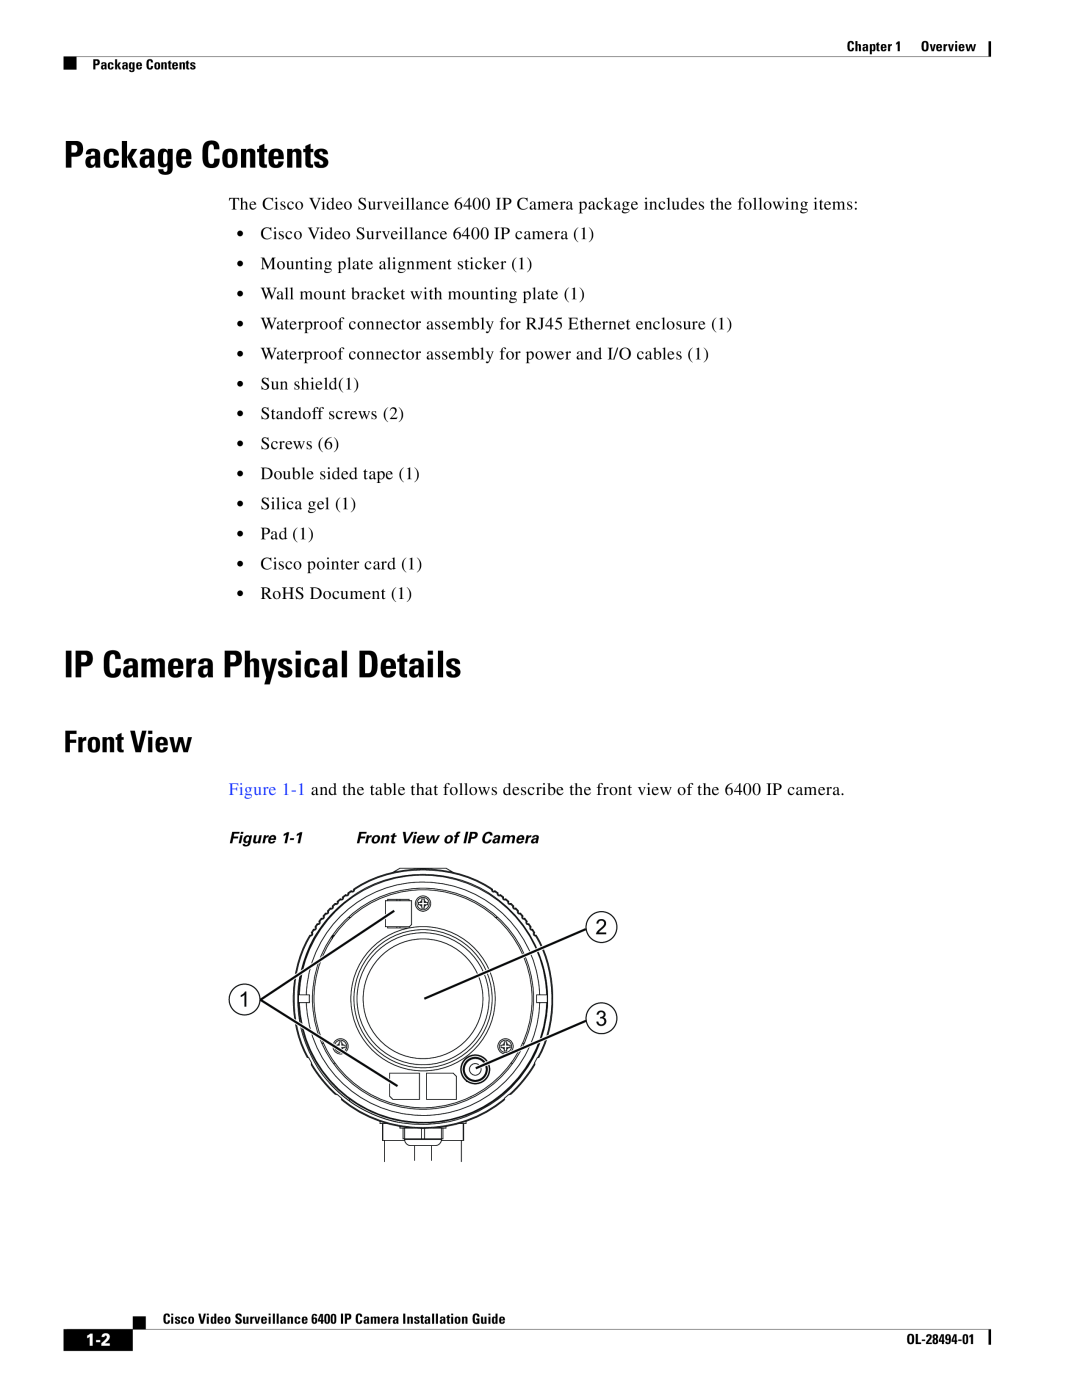 Cisco Systems 6400 manual Package Contents, IP Camera Physical Details, Front View 